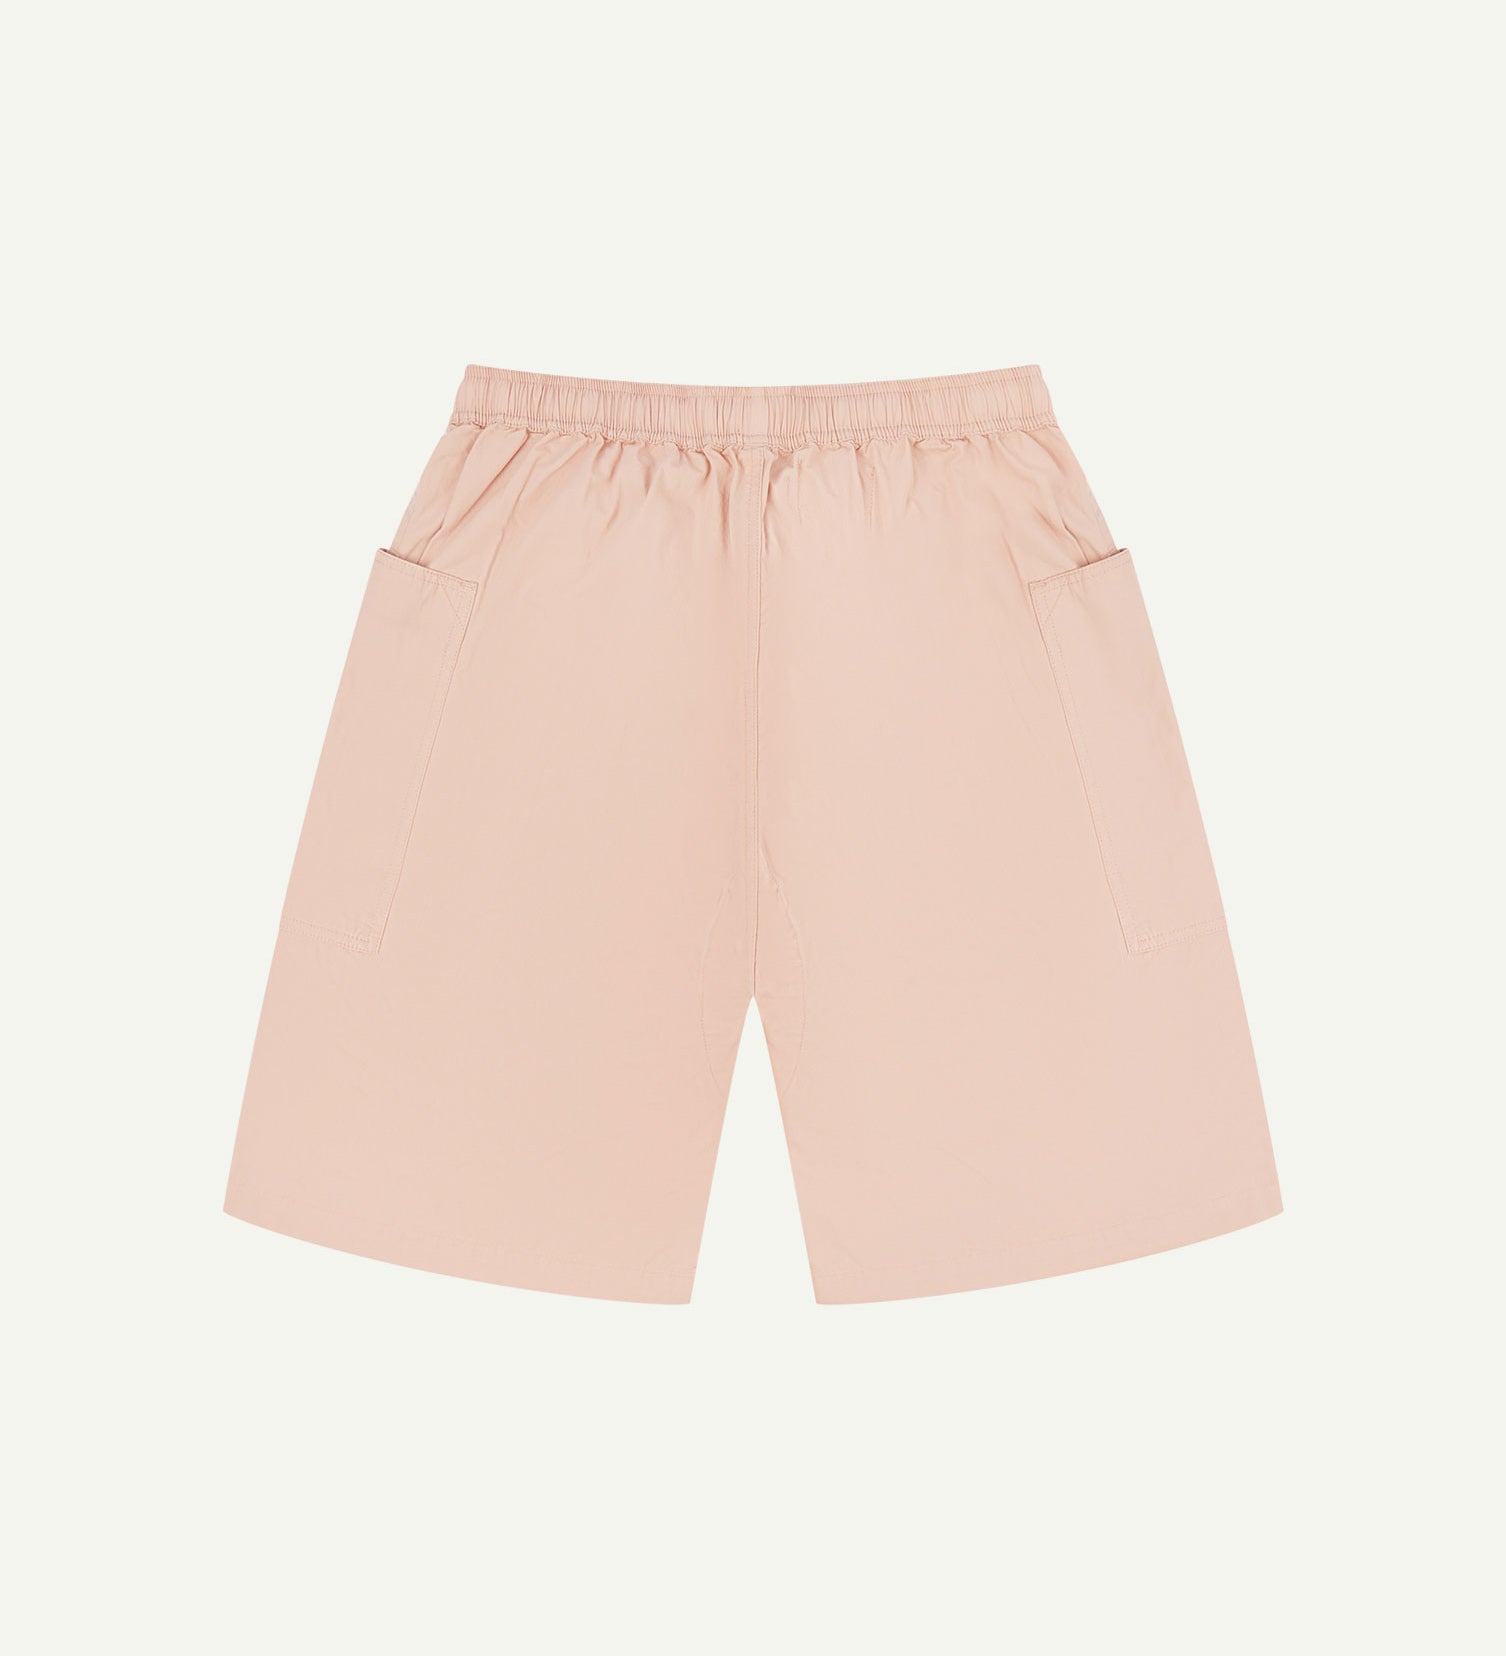 Back flat view of dusty pink organic cotton #5015 lightweight cotton shorts by Uskees. Clear view of lightweight elasticated waist and pockets.